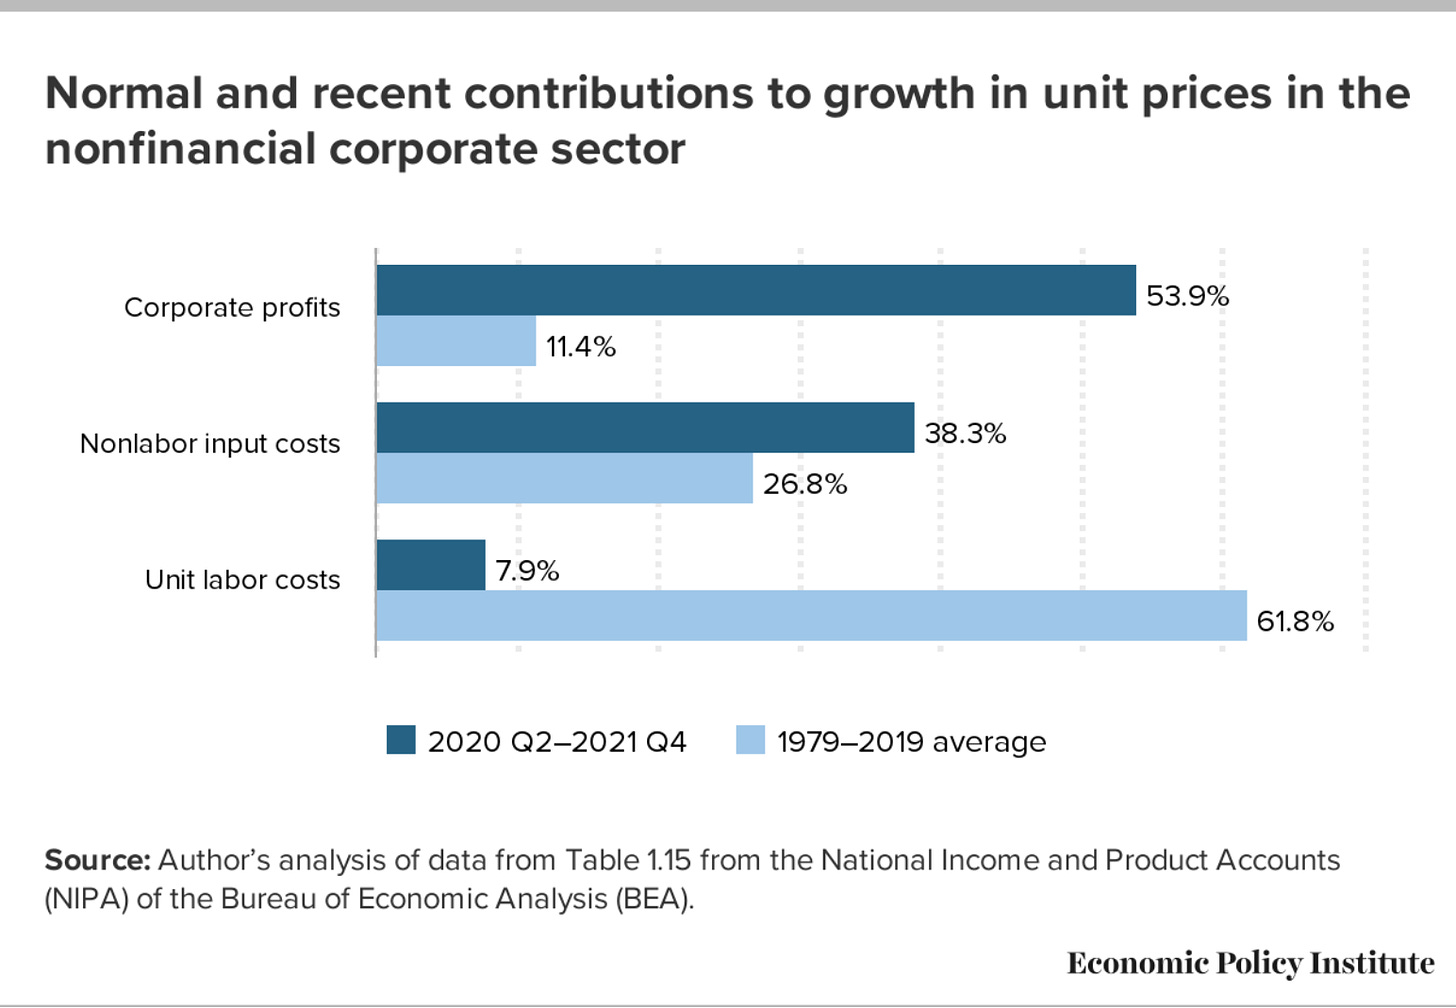 Corporate profits, nonlabor input costs, unit labor costs before and after the pandemic